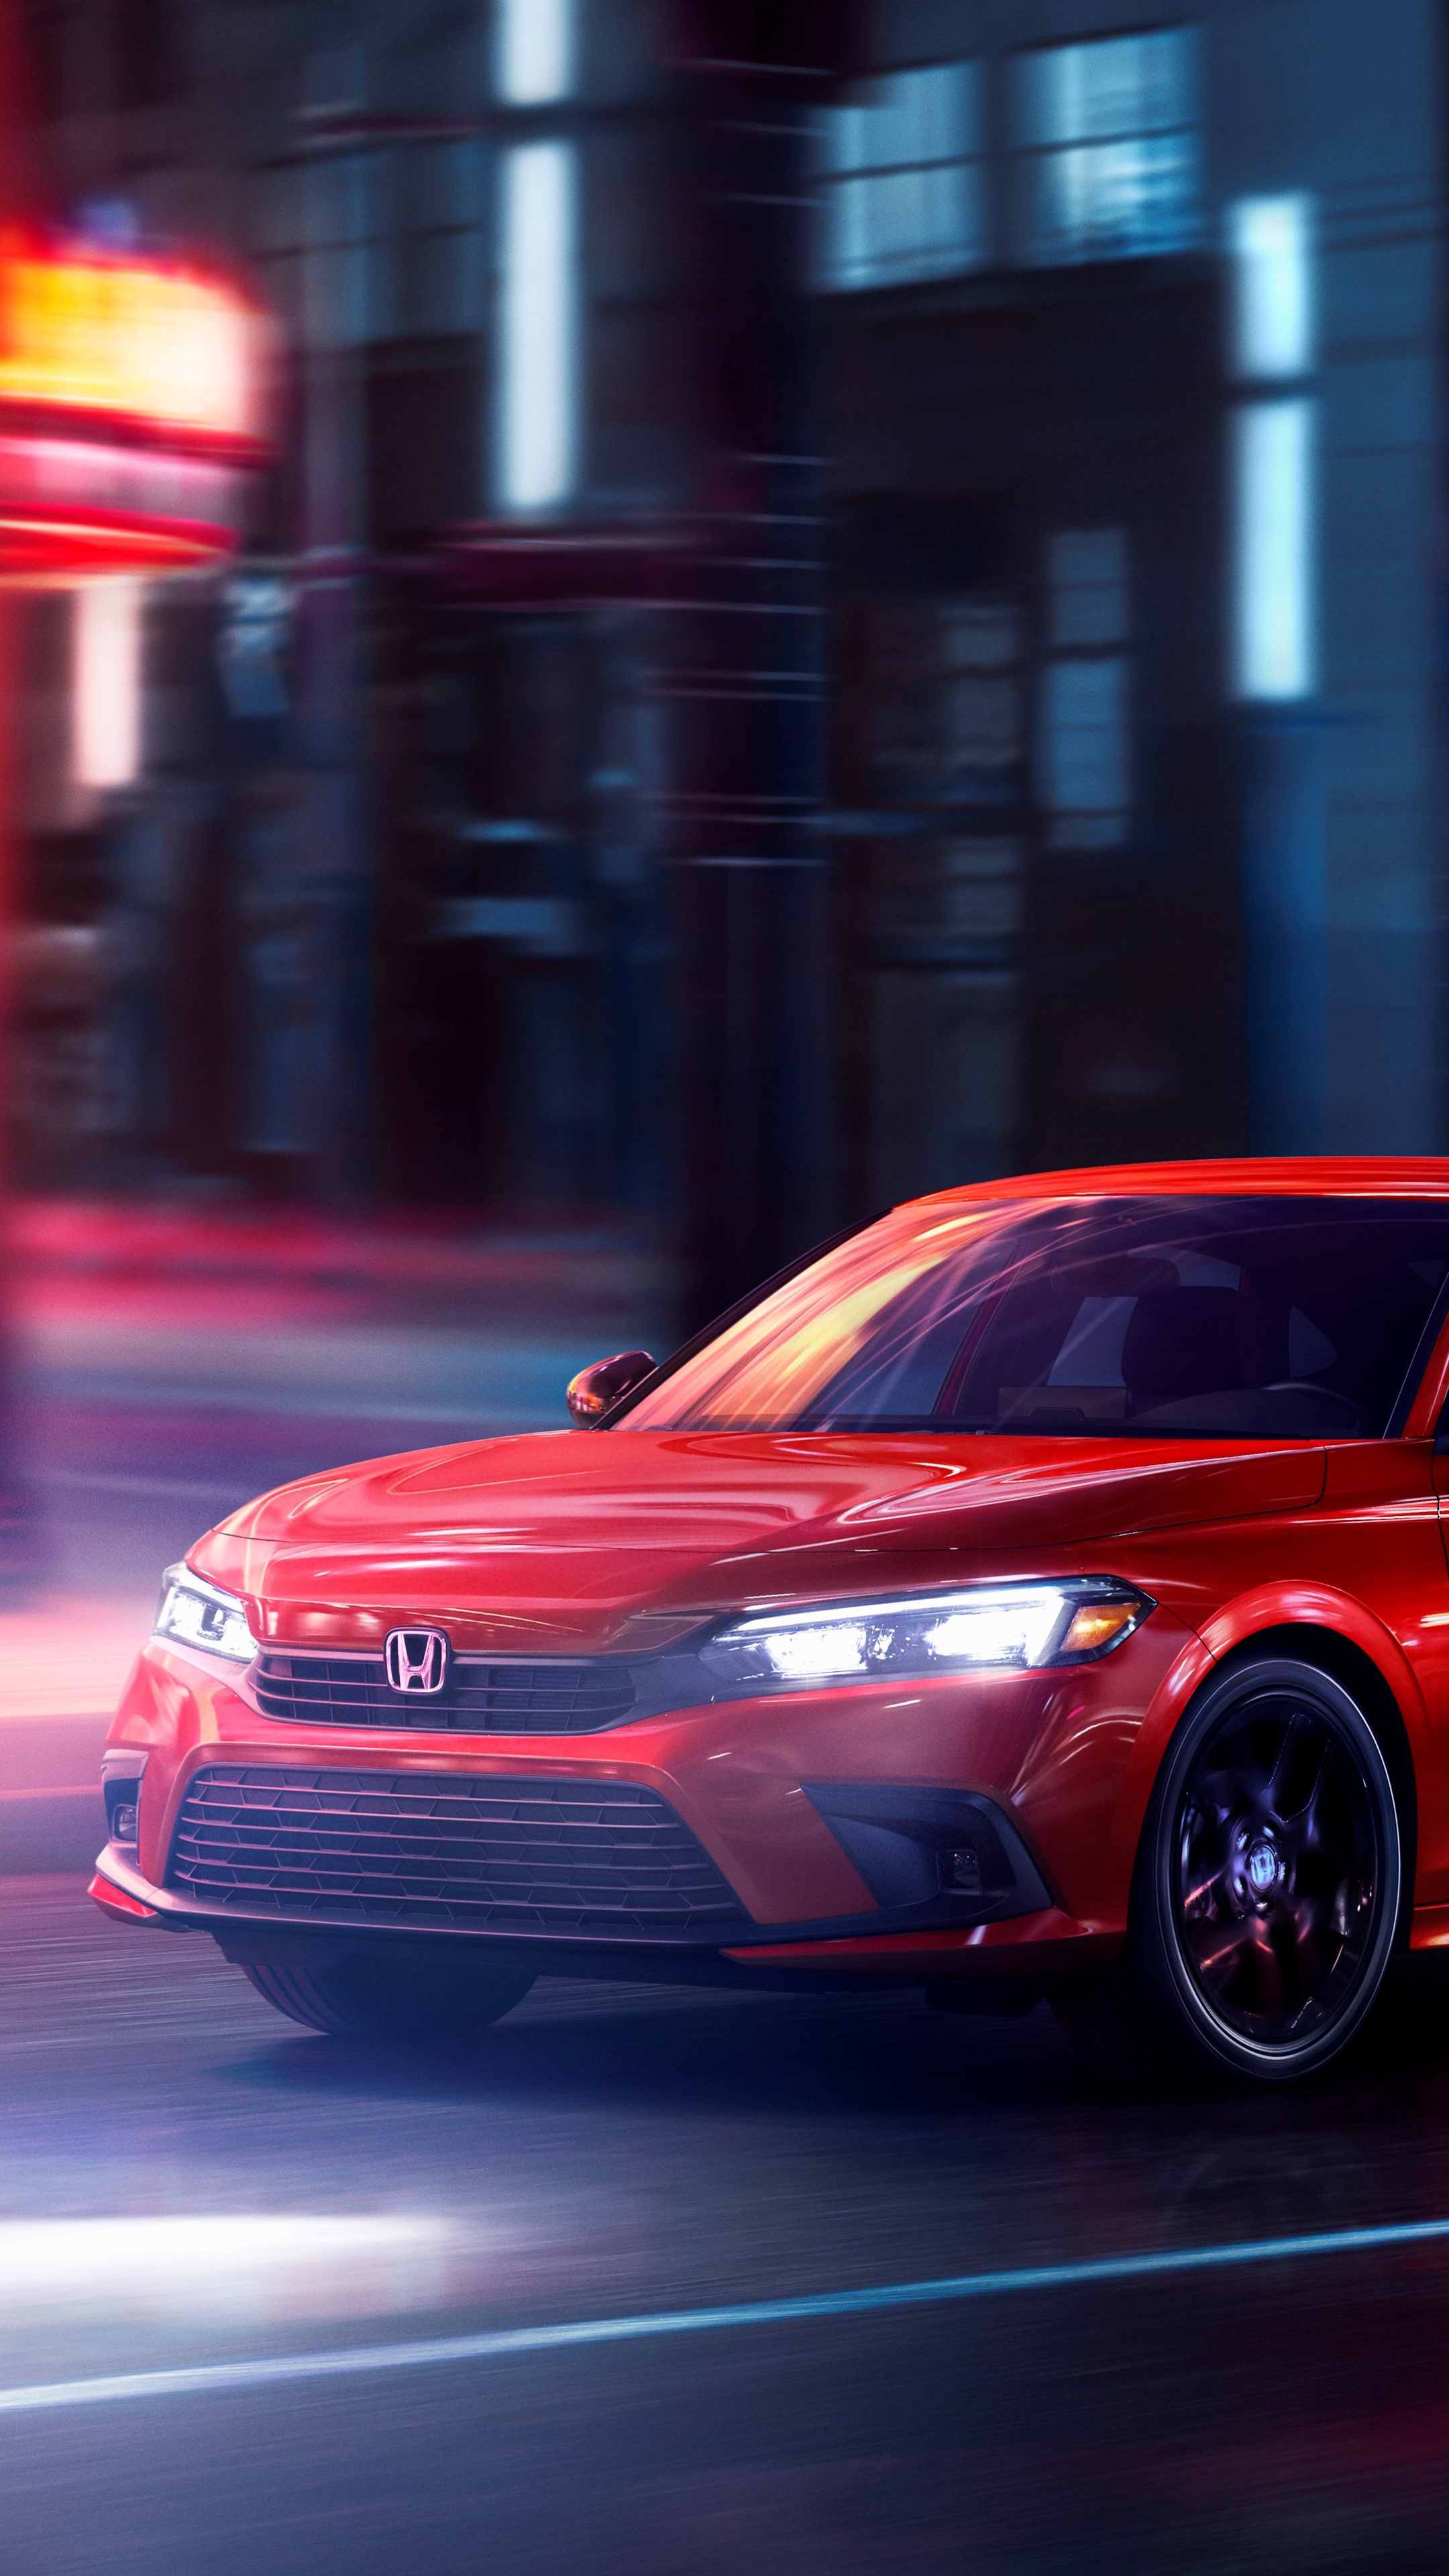 Honda Civic, Sporty and dynamic, Driver-focused technology, Expressive design, 2160x3840 4K Handy